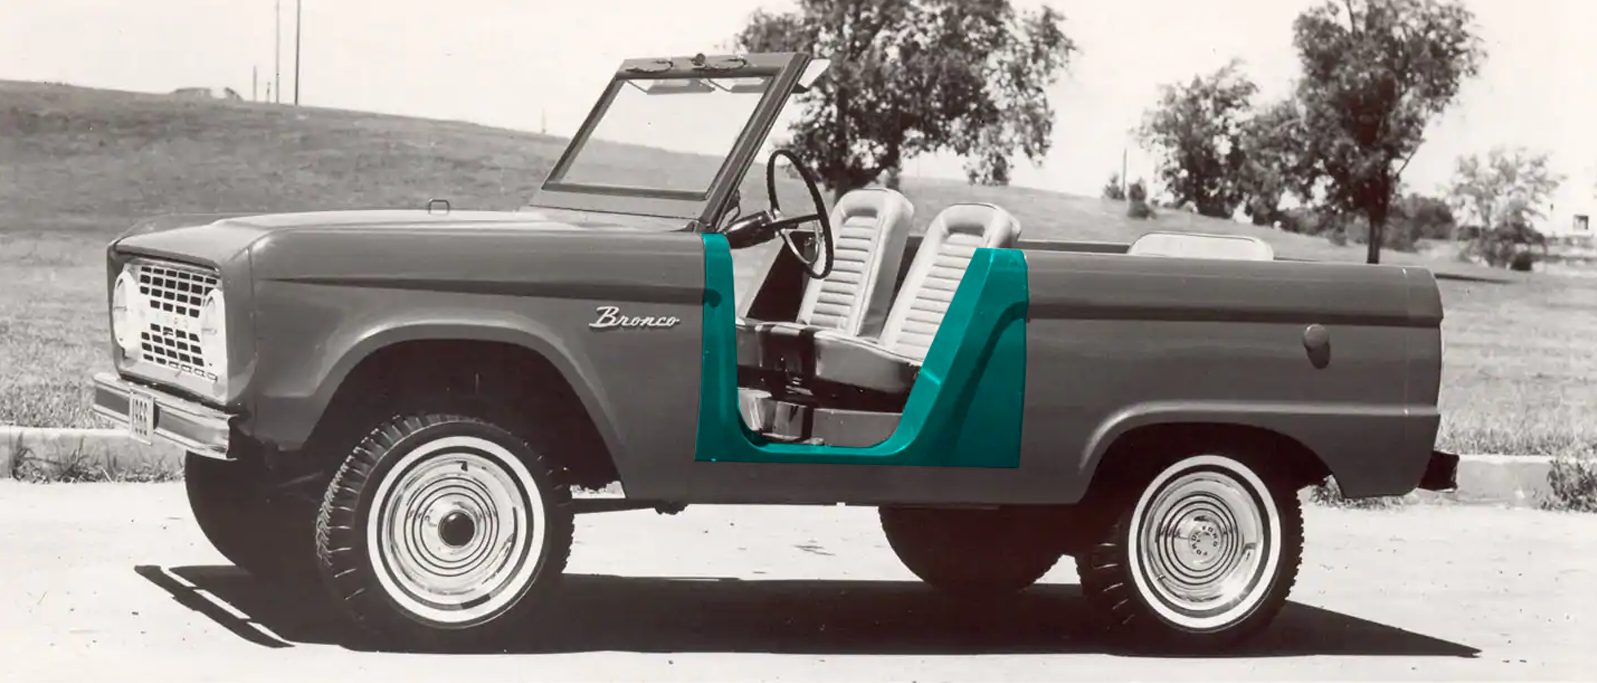 The 2021 Ford Bronco Should Totally Get Roadster Doors